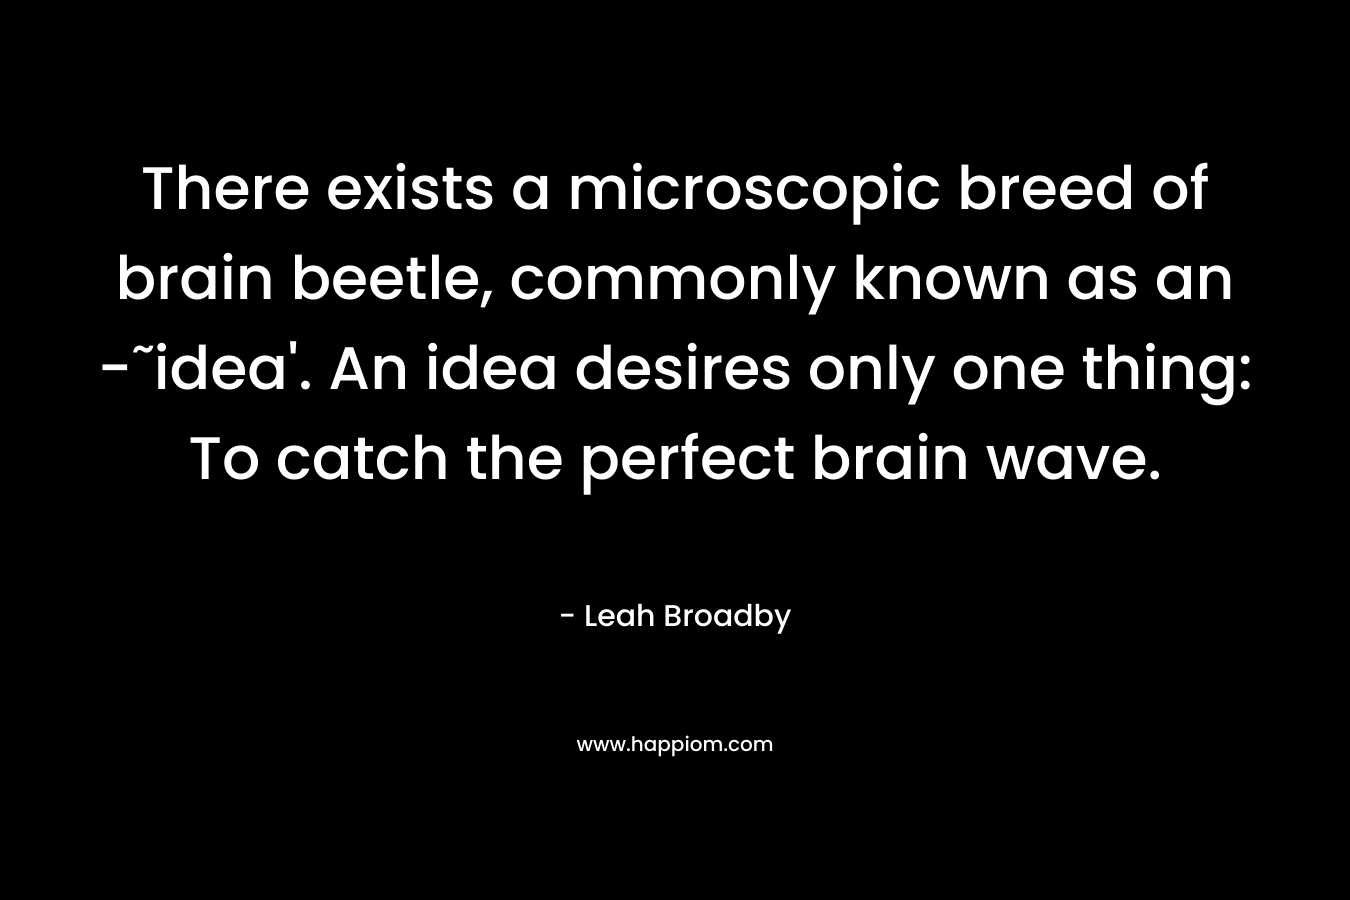 There exists a microscopic breed of brain beetle, commonly known as an -˜idea’. An idea desires only one thing: To catch the perfect brain wave. – Leah Broadby